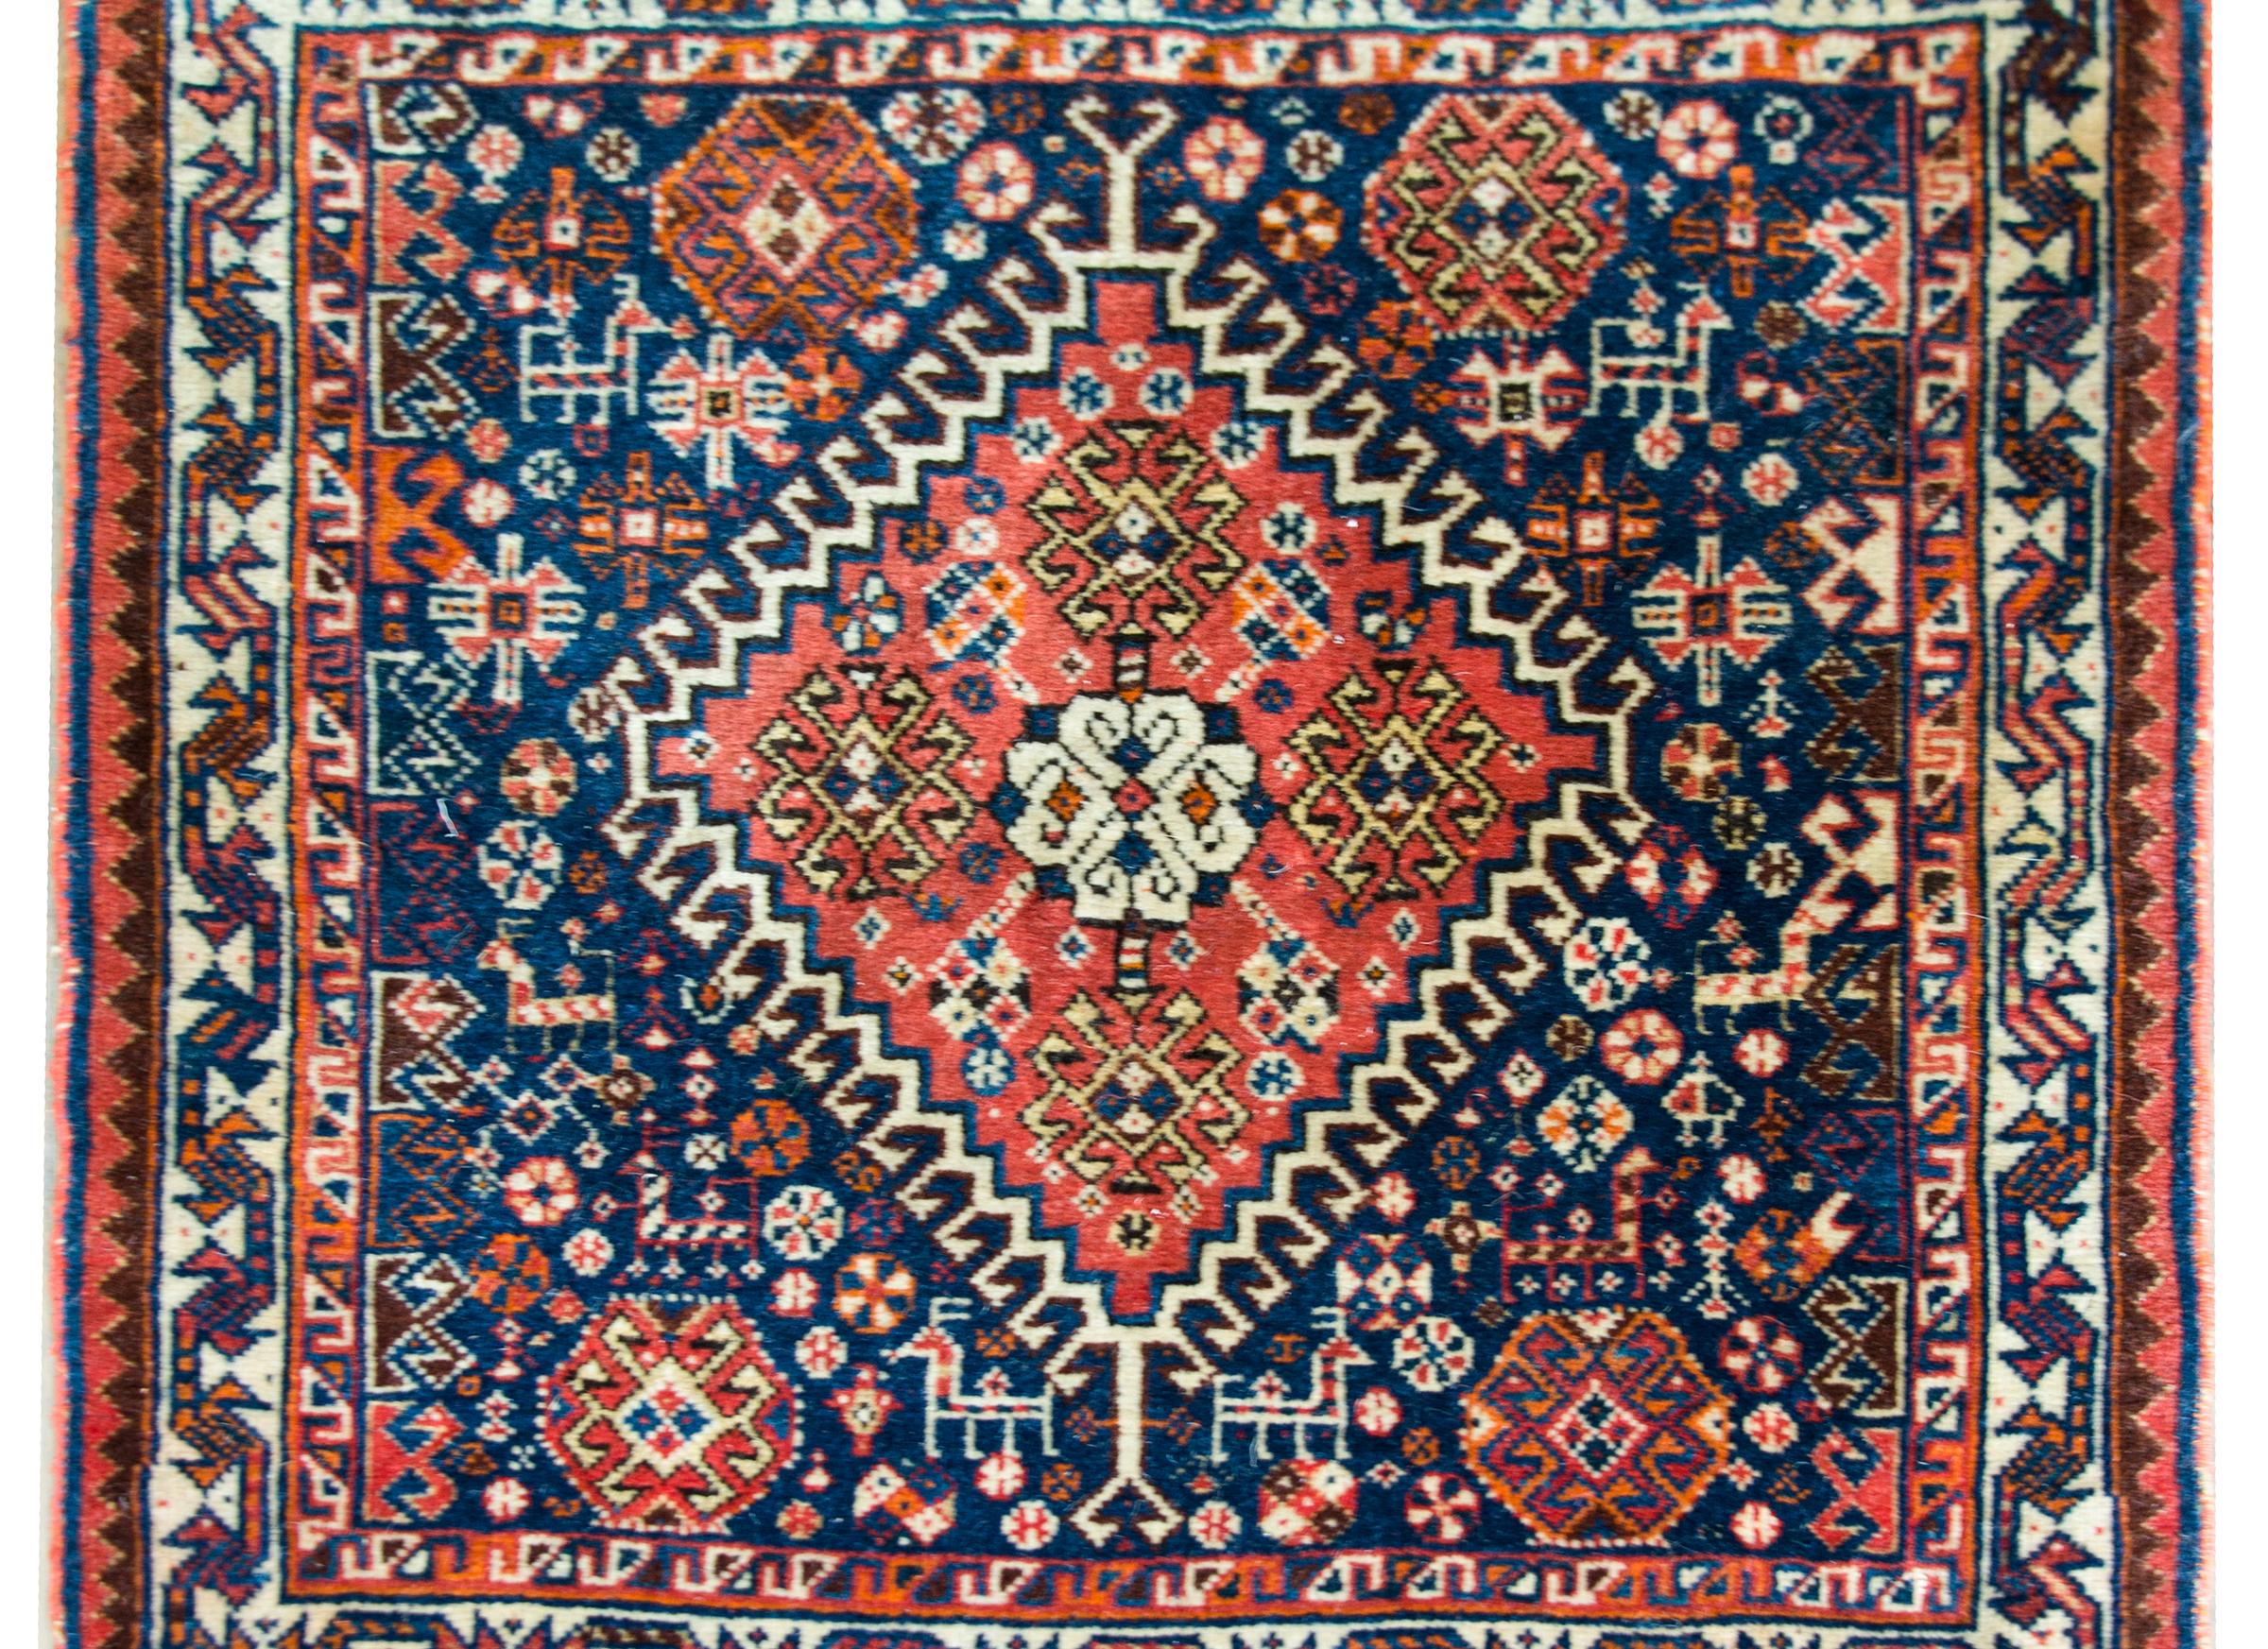 A beautiful early 20th century Persian Afshar rug with a fantastic pattern containing a large central diamond medallion with stylized flowers, and living amidst a field of densely woven petite stylized flowers and goats, all woven in crimson,